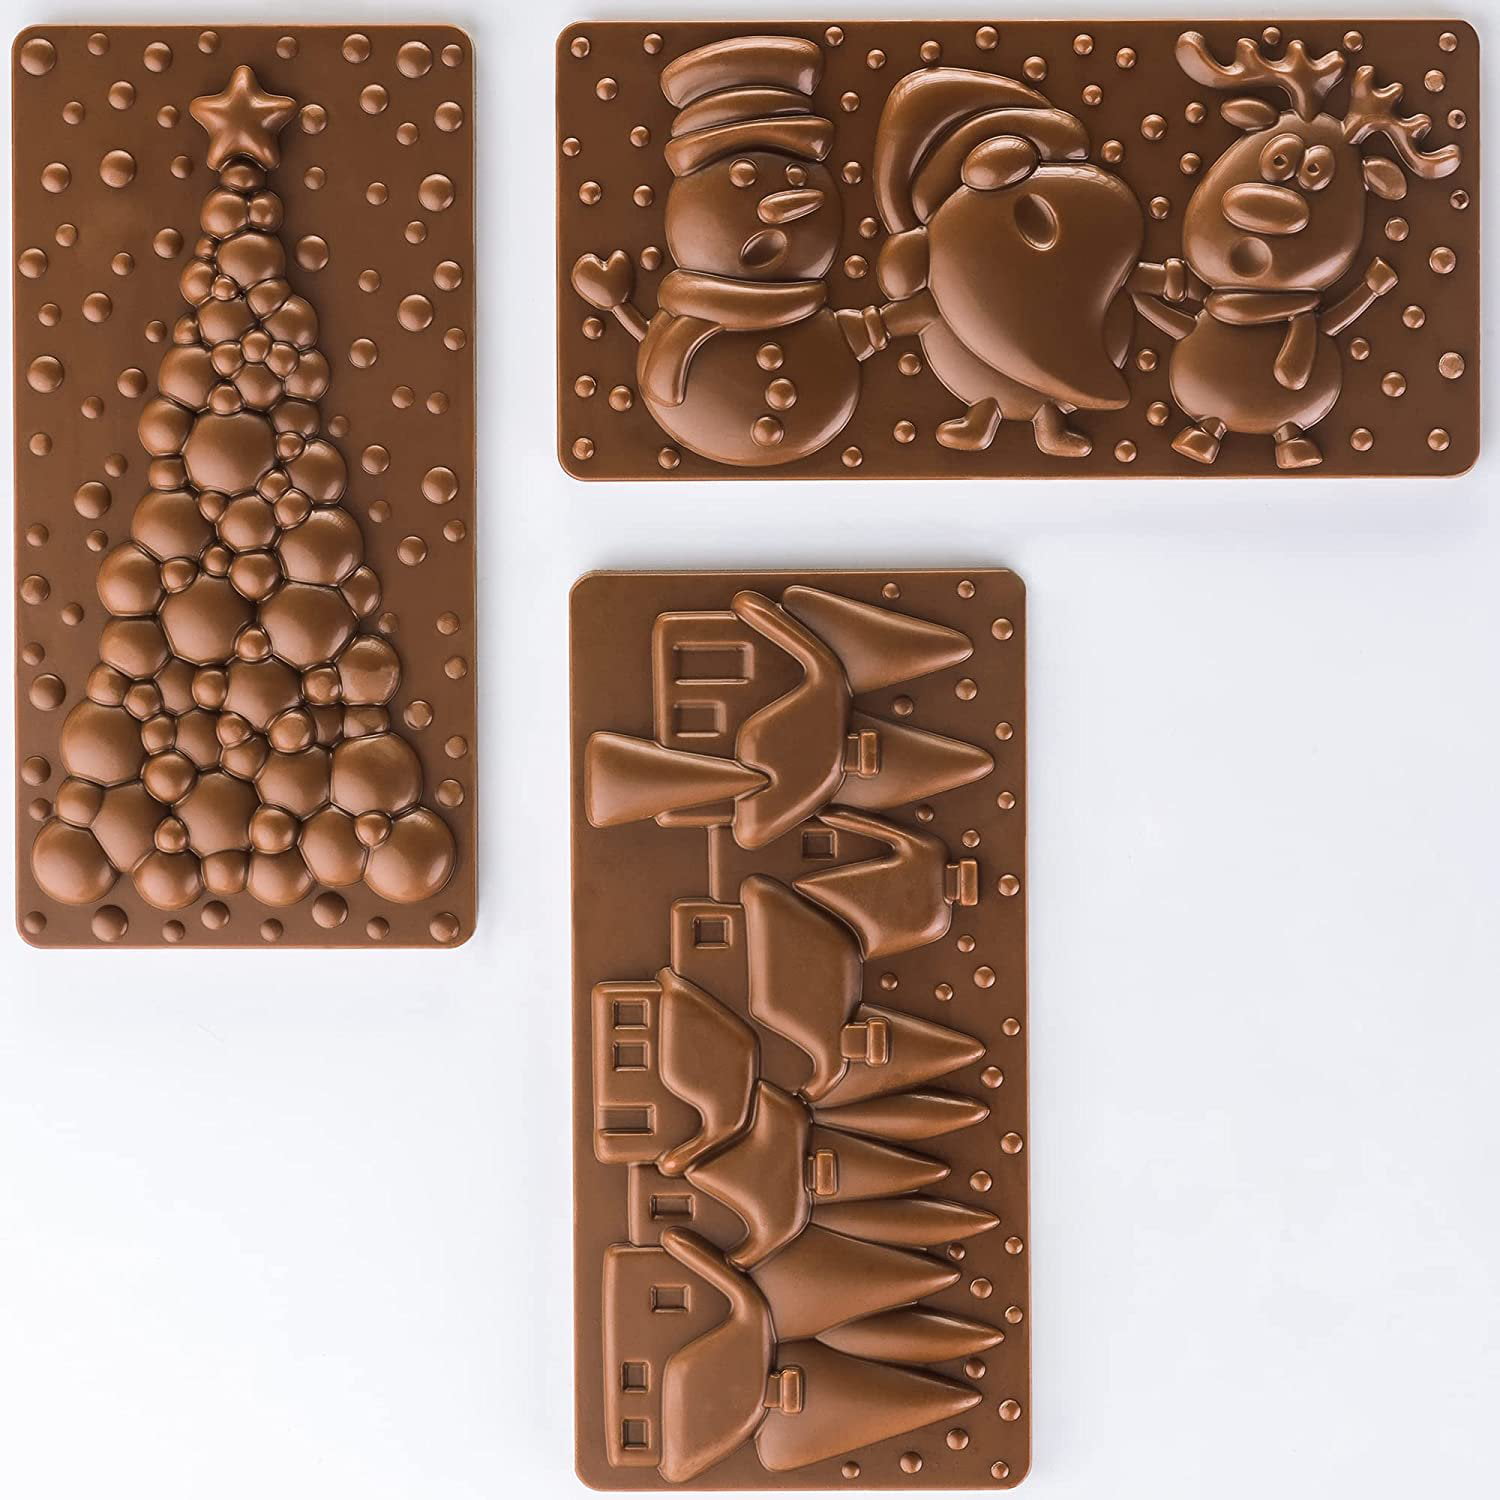 Matfer 380240 Chocolate Mold 3 Chocolate Bars With 18 Squares Each 6L X  2-3/4W X